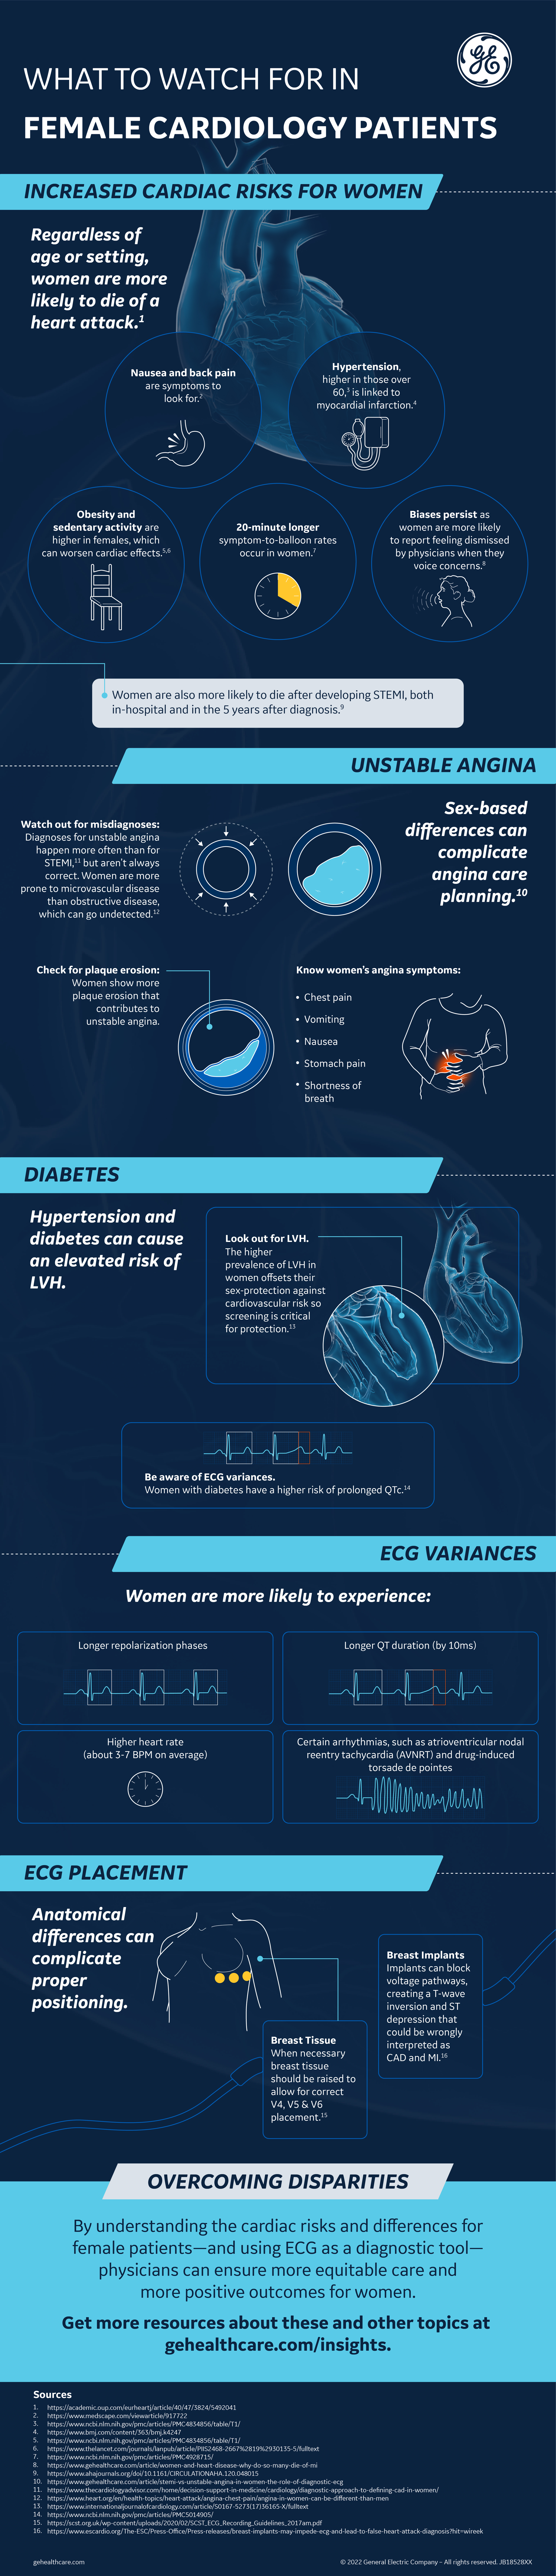 insights-infographic_what-to-watch-for-in-female-cardiology-patients_dcar_global_jb18528xx.jpg